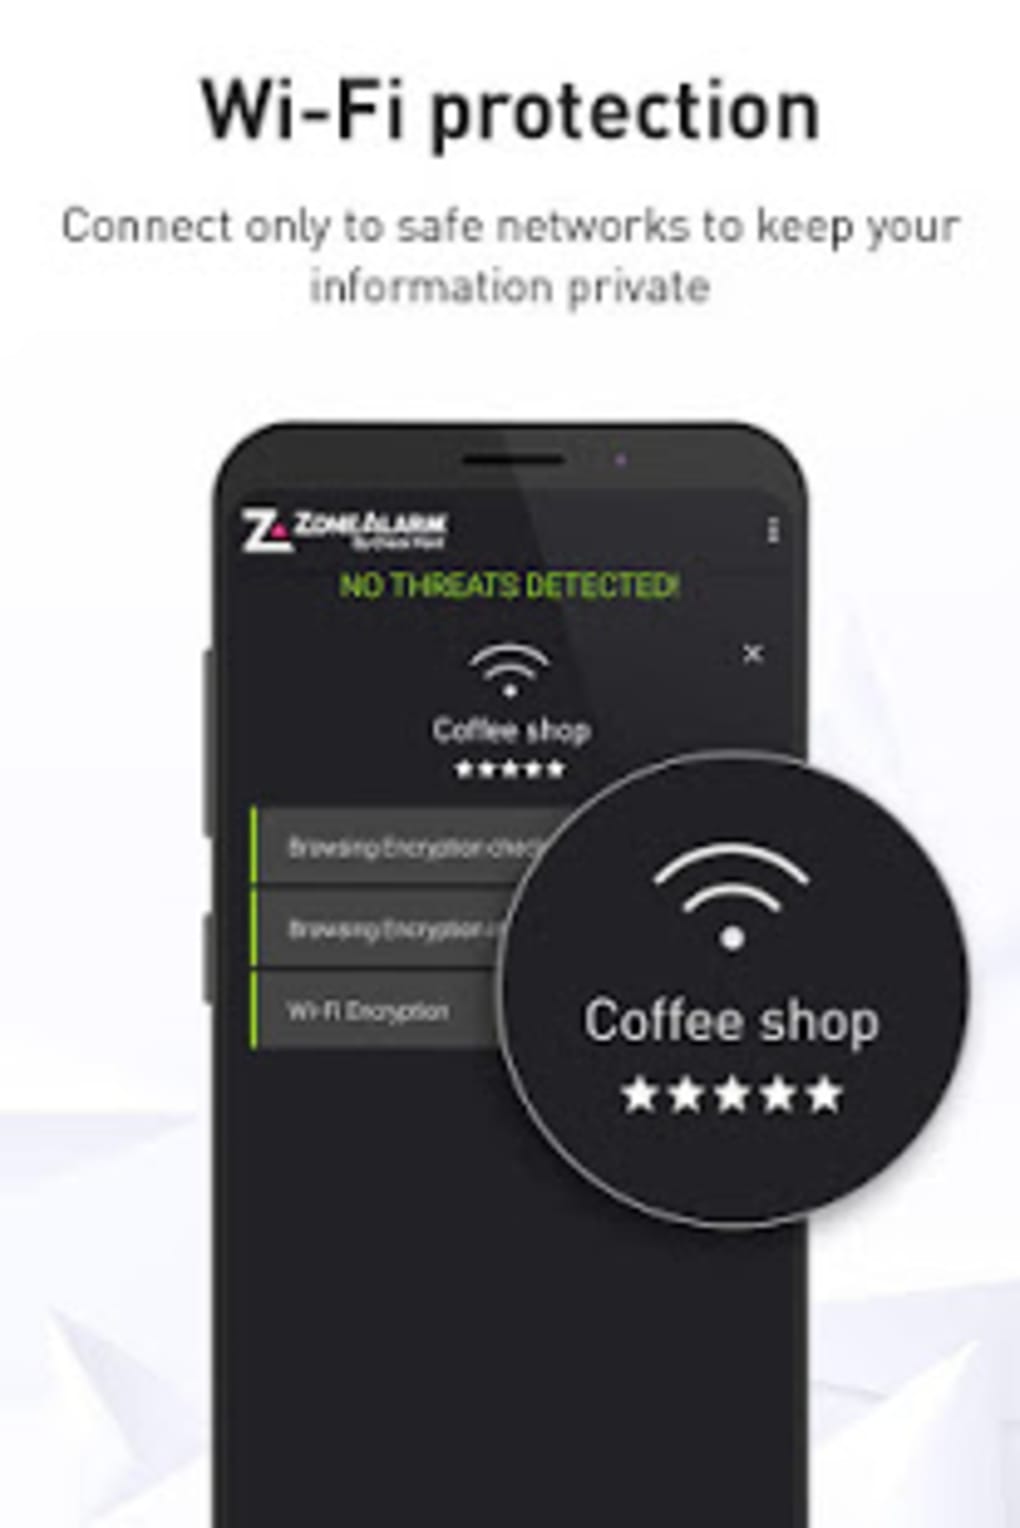 download zonealarm mobile security